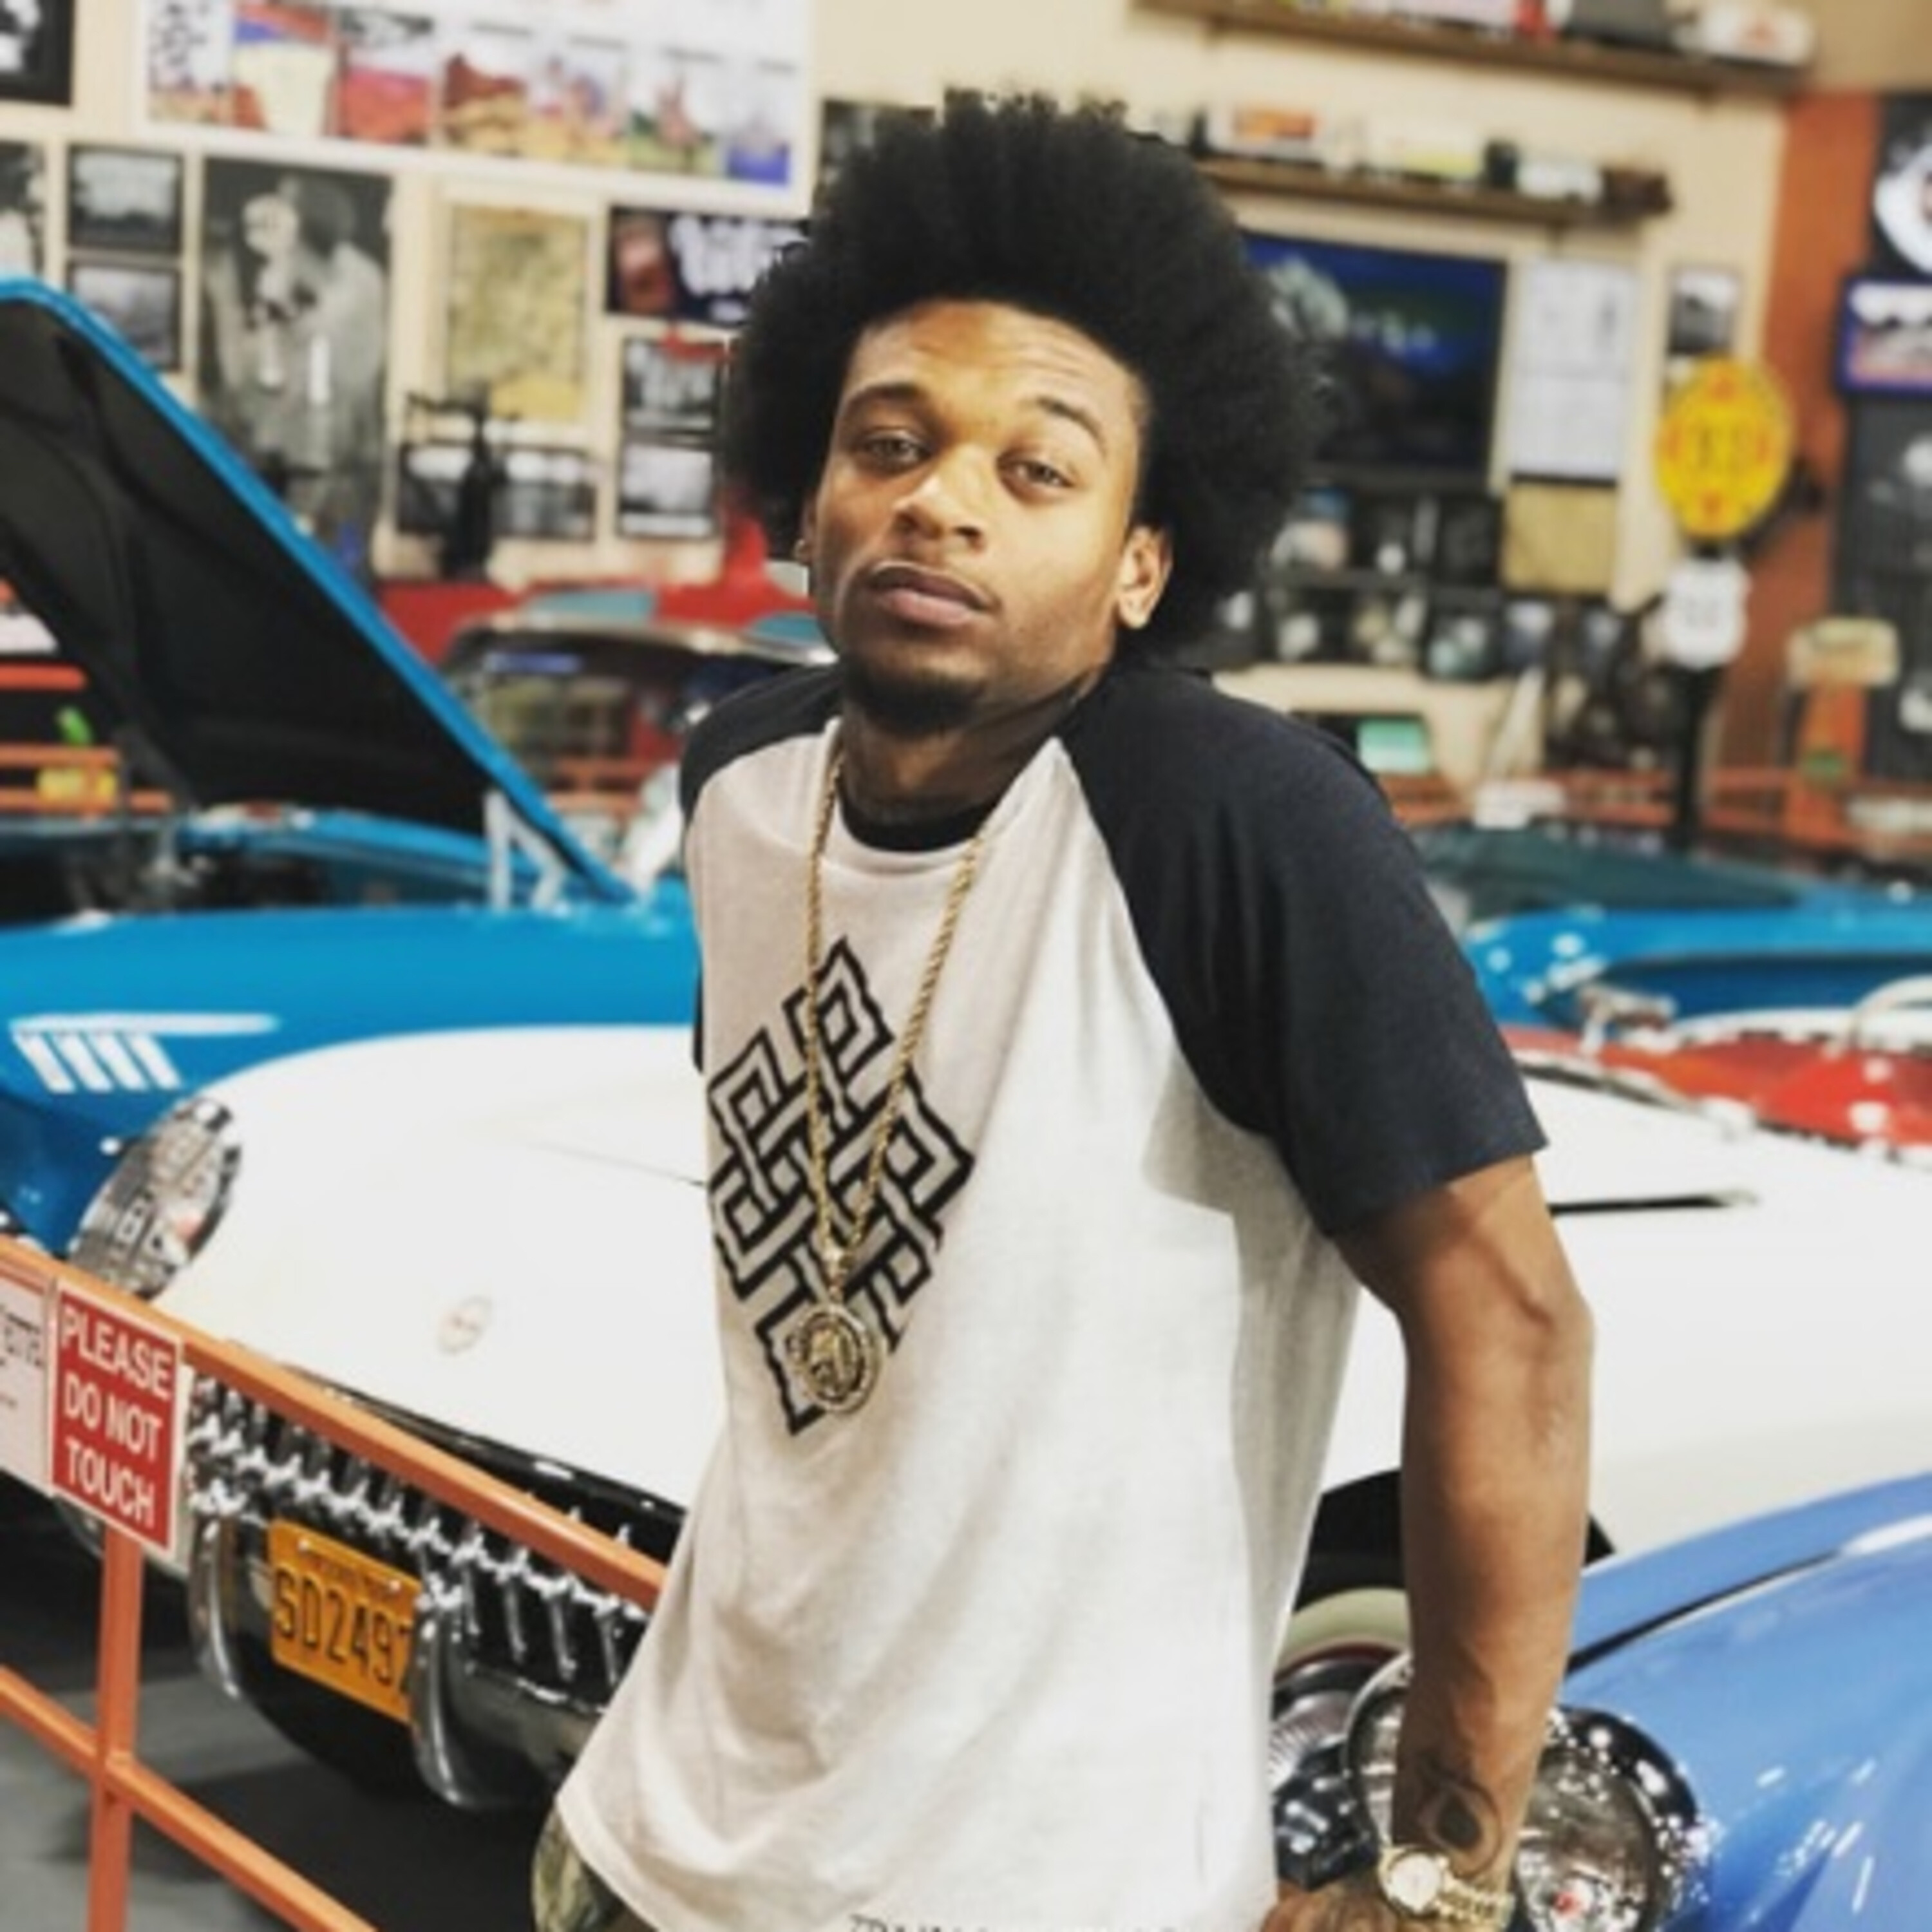 The Plug Named Jimmy: Betting on himself in 2020 and creating new levels in Hip-Hop